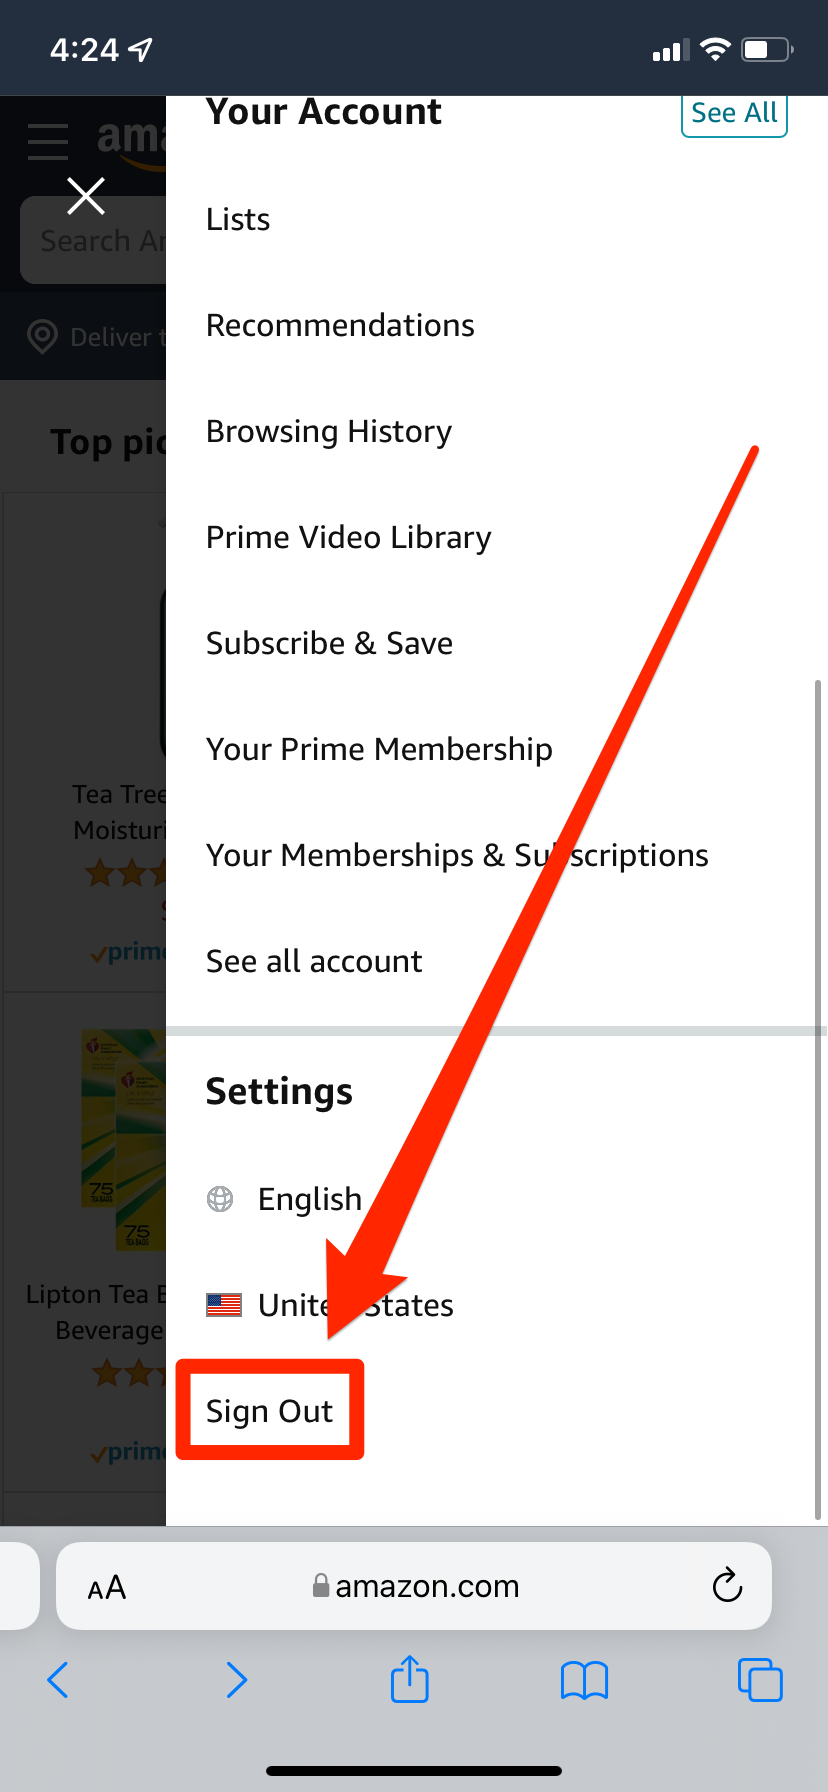 The "Sign Out" option on the Amazon website